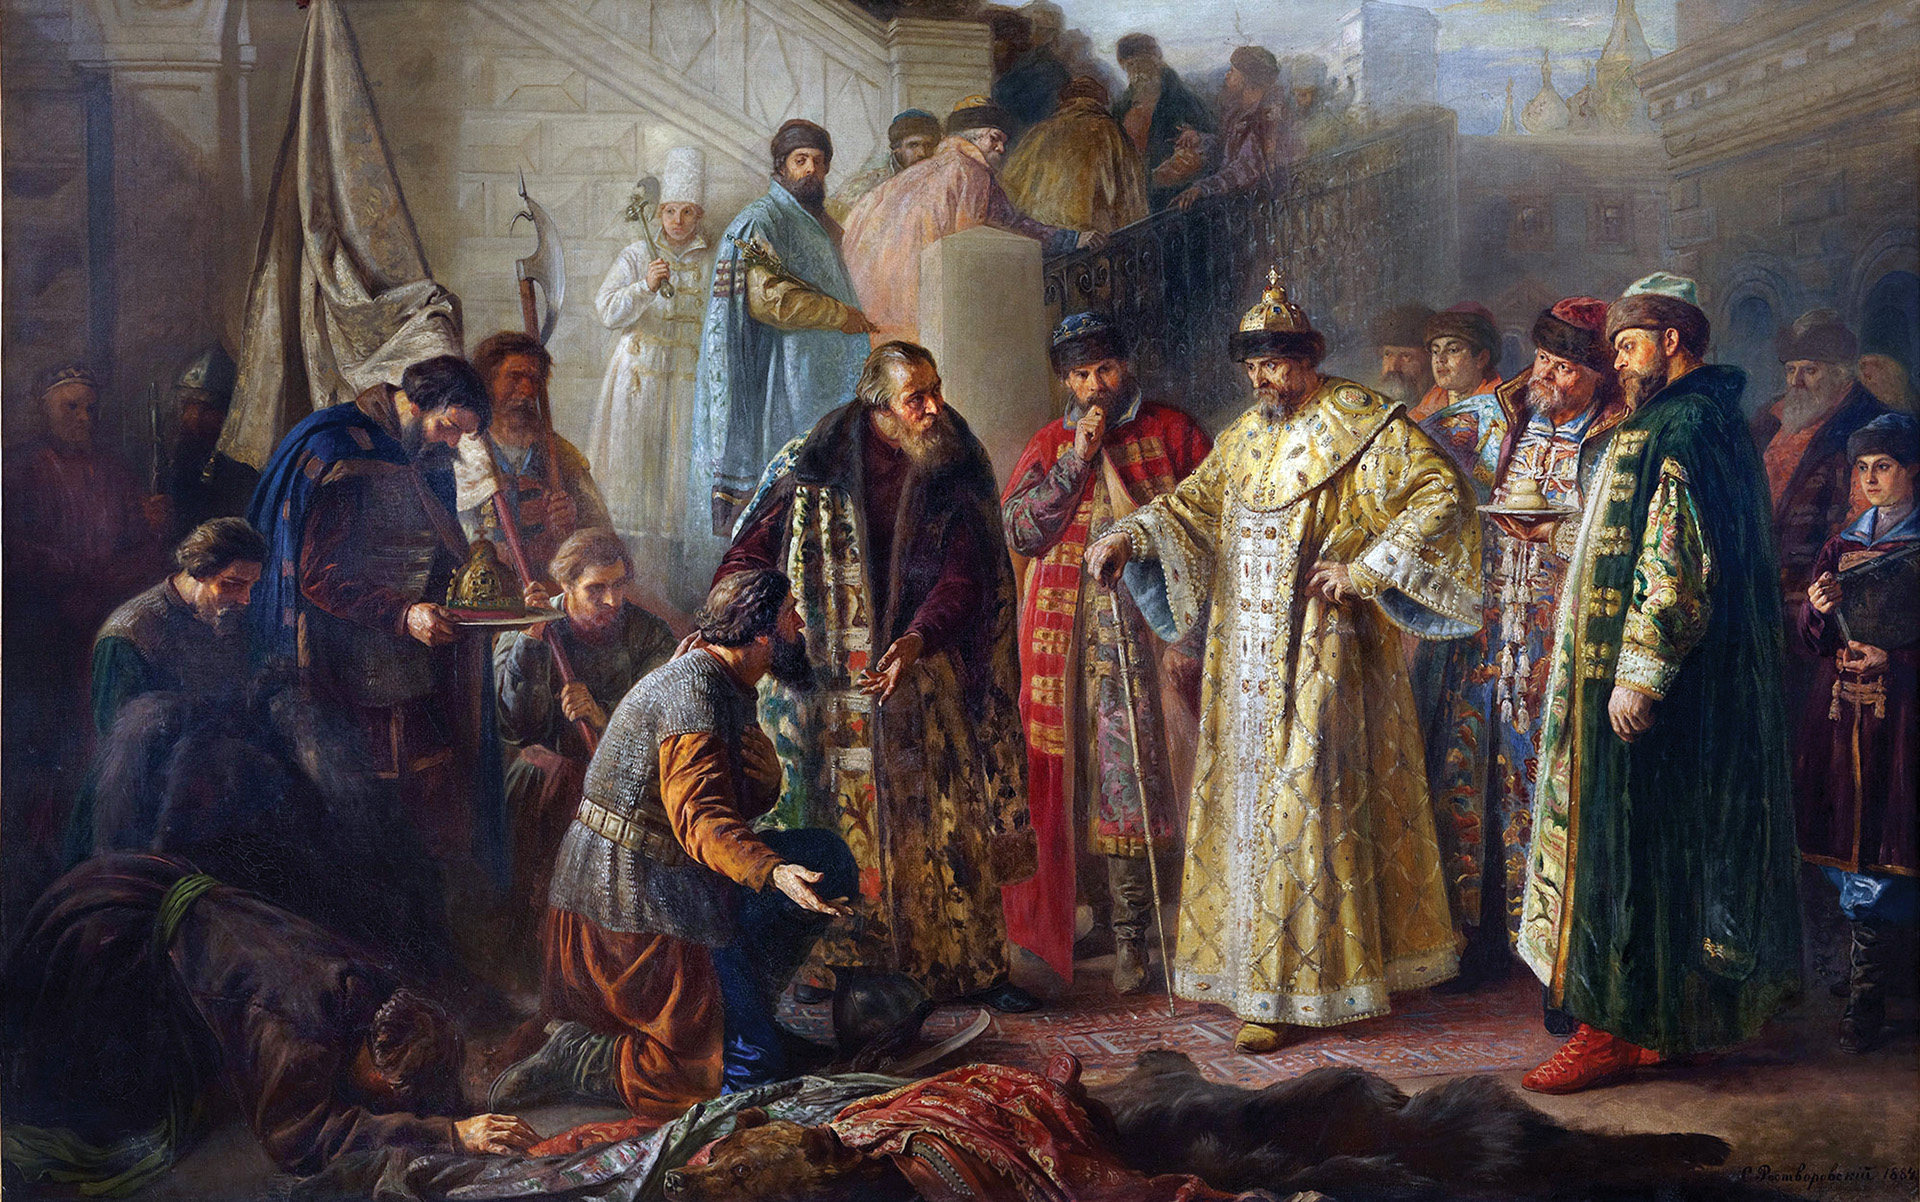 Tsar Ivan IV expressed his pleasure at the exploits and acquisitions of the Cossack expedition into the Khanate of Sibir when Yermak's envoys returned to Moscow in 1583 laden with riches. 